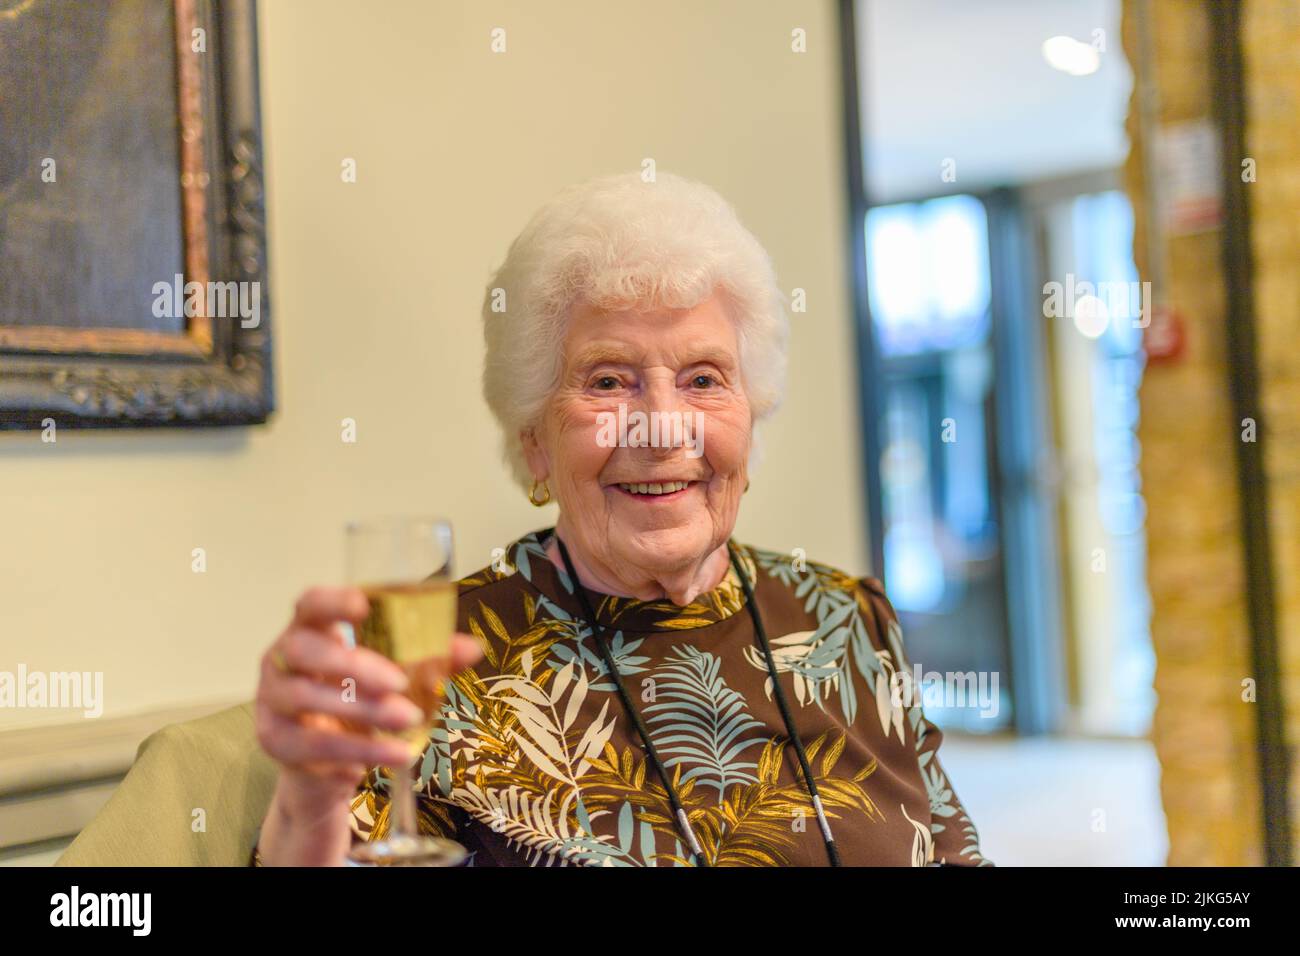 A cheerful old Caucasian woman holding a glass of wine to celebrate Stock Photo